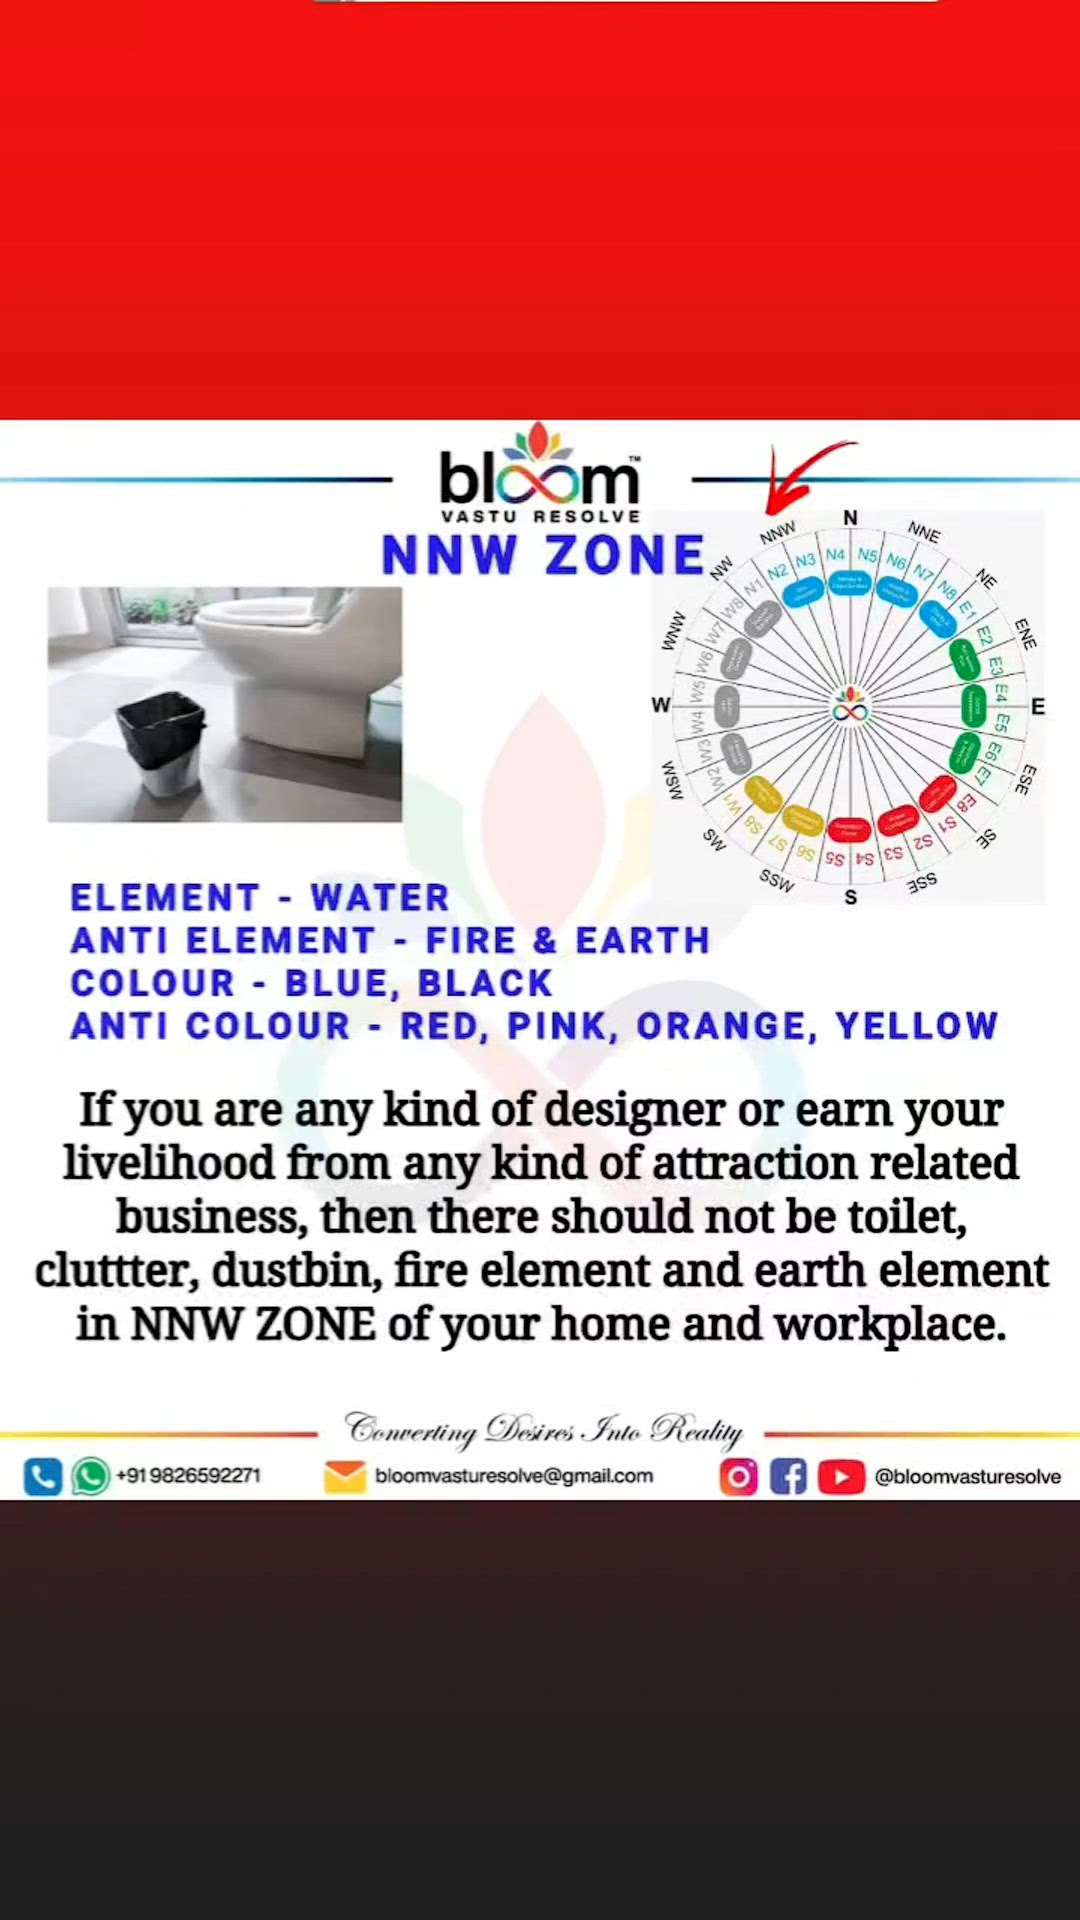 Your queries and comments are always welcome.
For more Vastu please follow @bloomvasturesolve
on YouTube, Instagram & Facebook
.
.
For personal consultation, feel free to contact certified MahaVastu Expert through
M - 9826592271
Or
bloomvasturesolve@gmail.com
#vastu #वास्तु #mahavastu #mahavastuexpert #bloomvasturesolve  #vastureels #vastulogy #vastuexpert  #vasturemedies  #vastuforhome #vastuforpeace #vastudosh #numerology #VastuForWealth  #nnwzone  #artist #designer